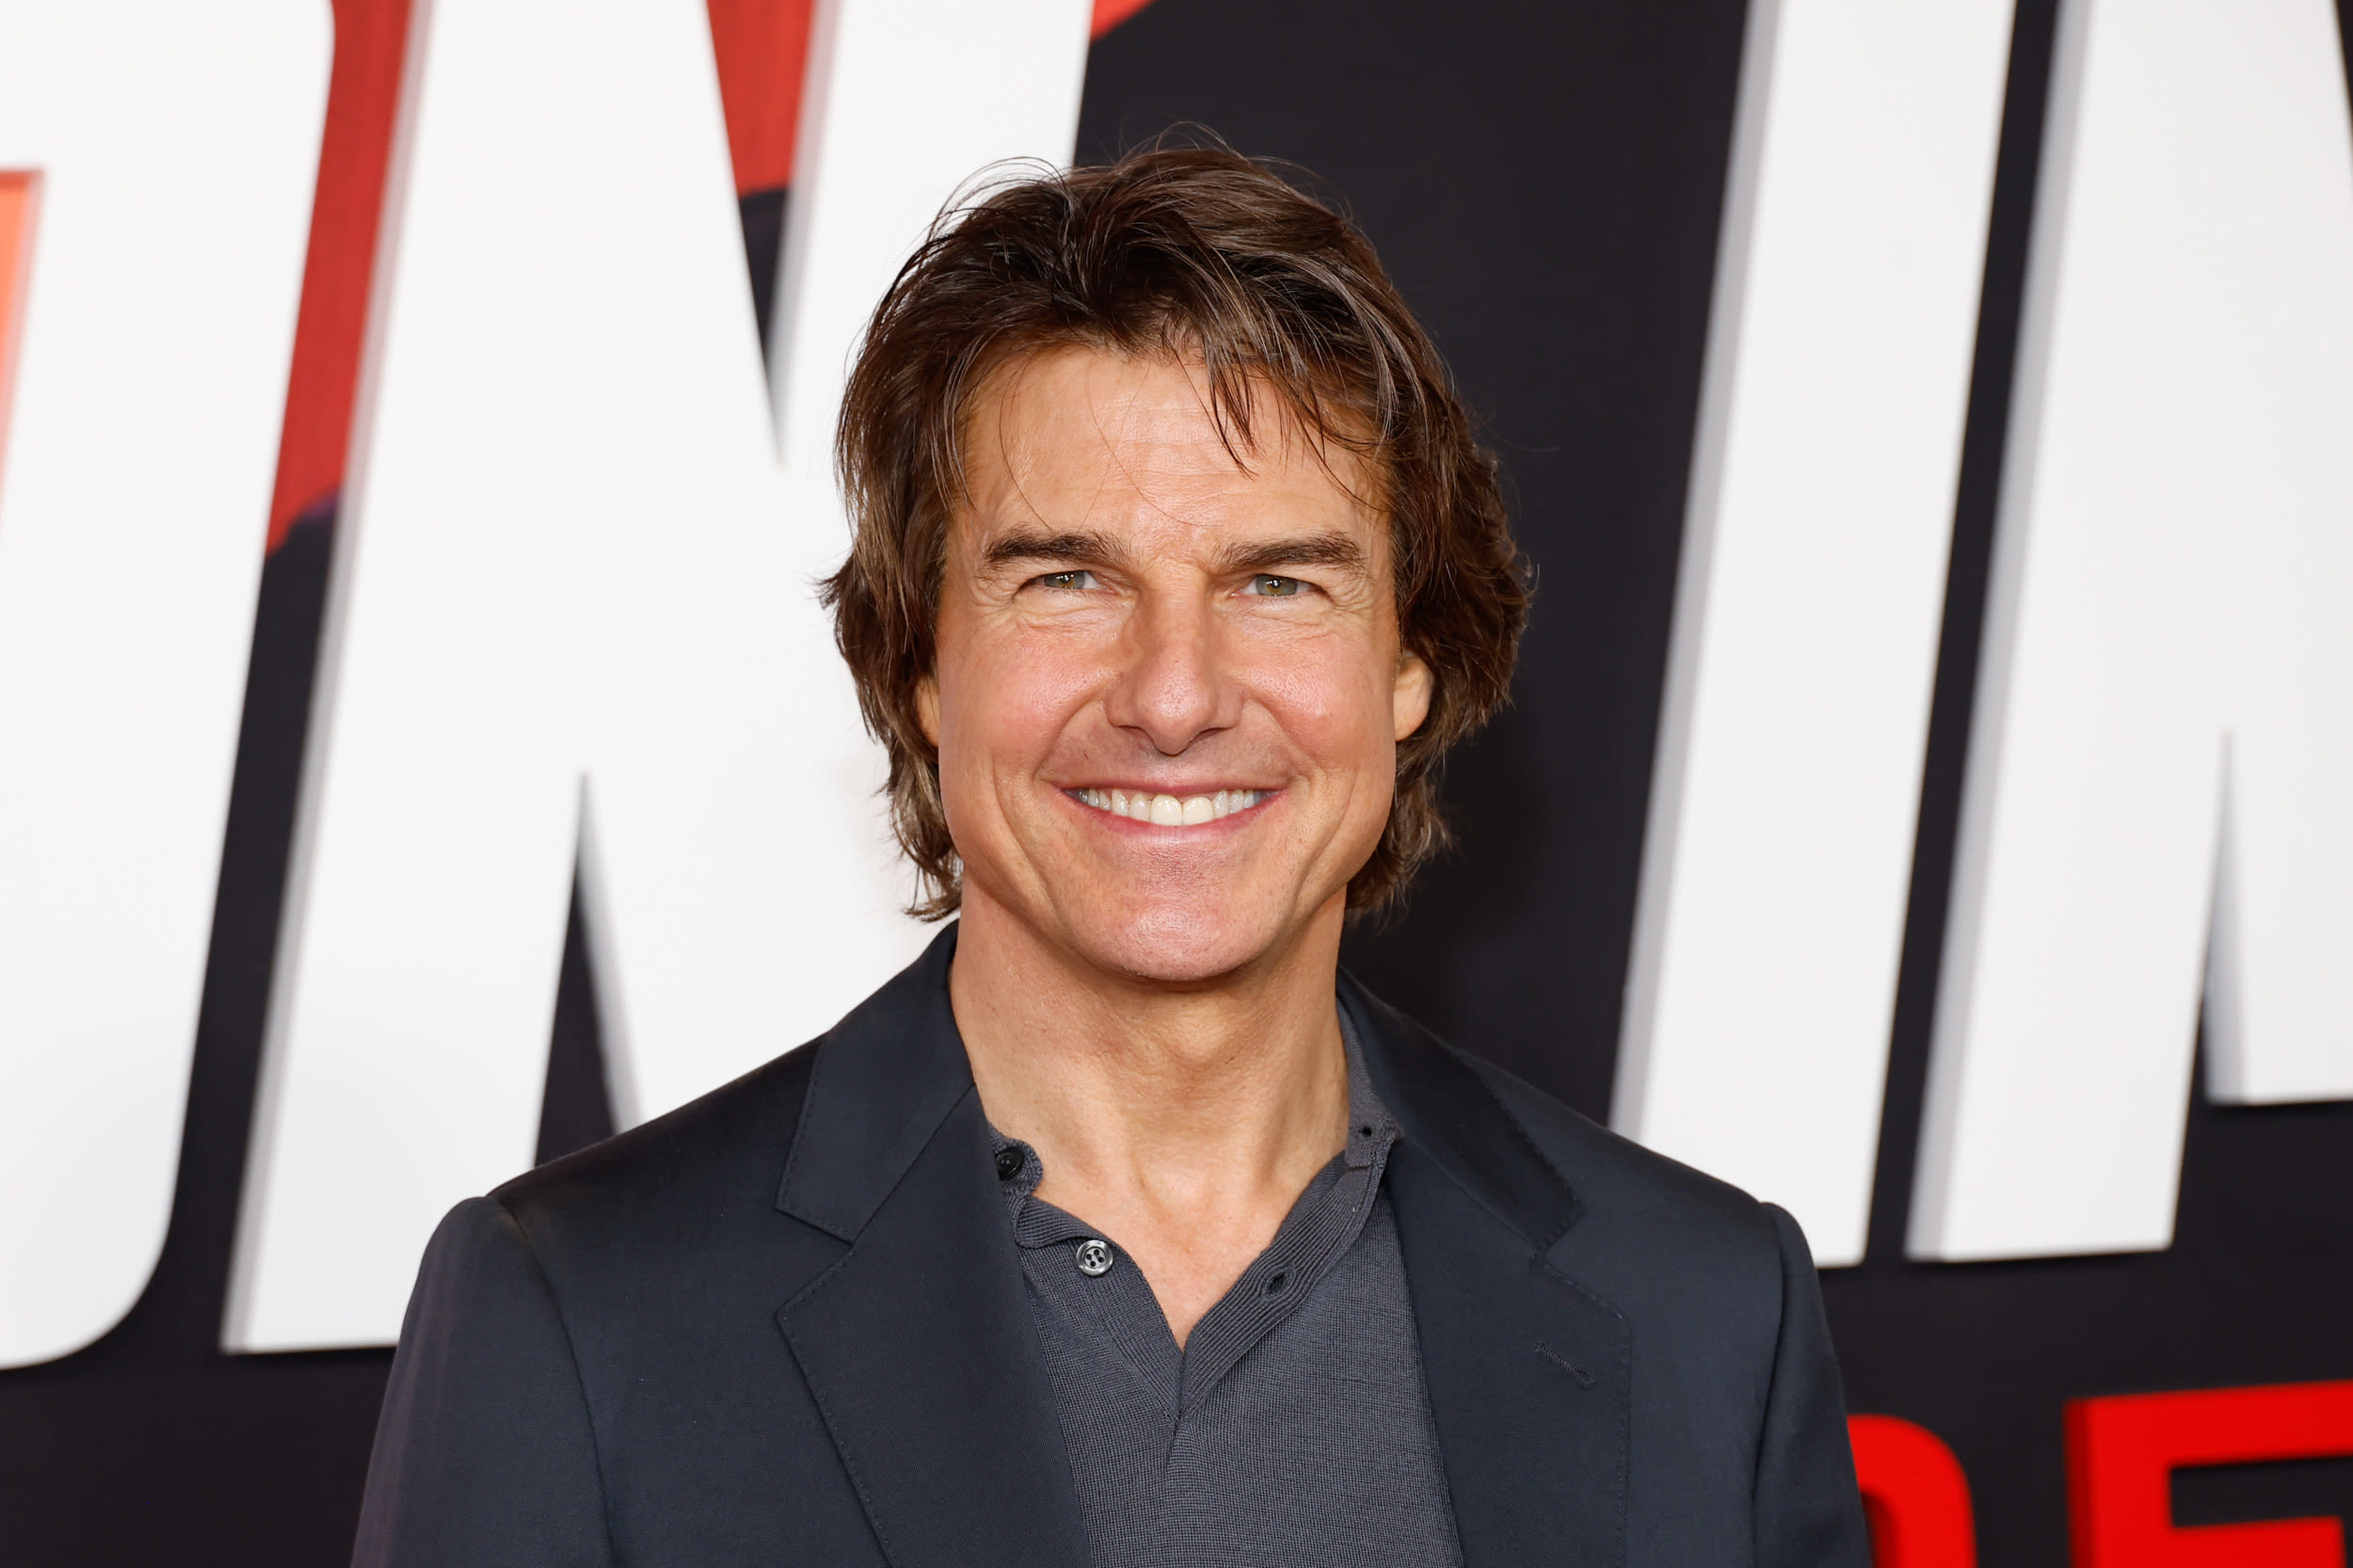 Tom Cruise poses with adult kids in 1st photo together in nearly 15 years